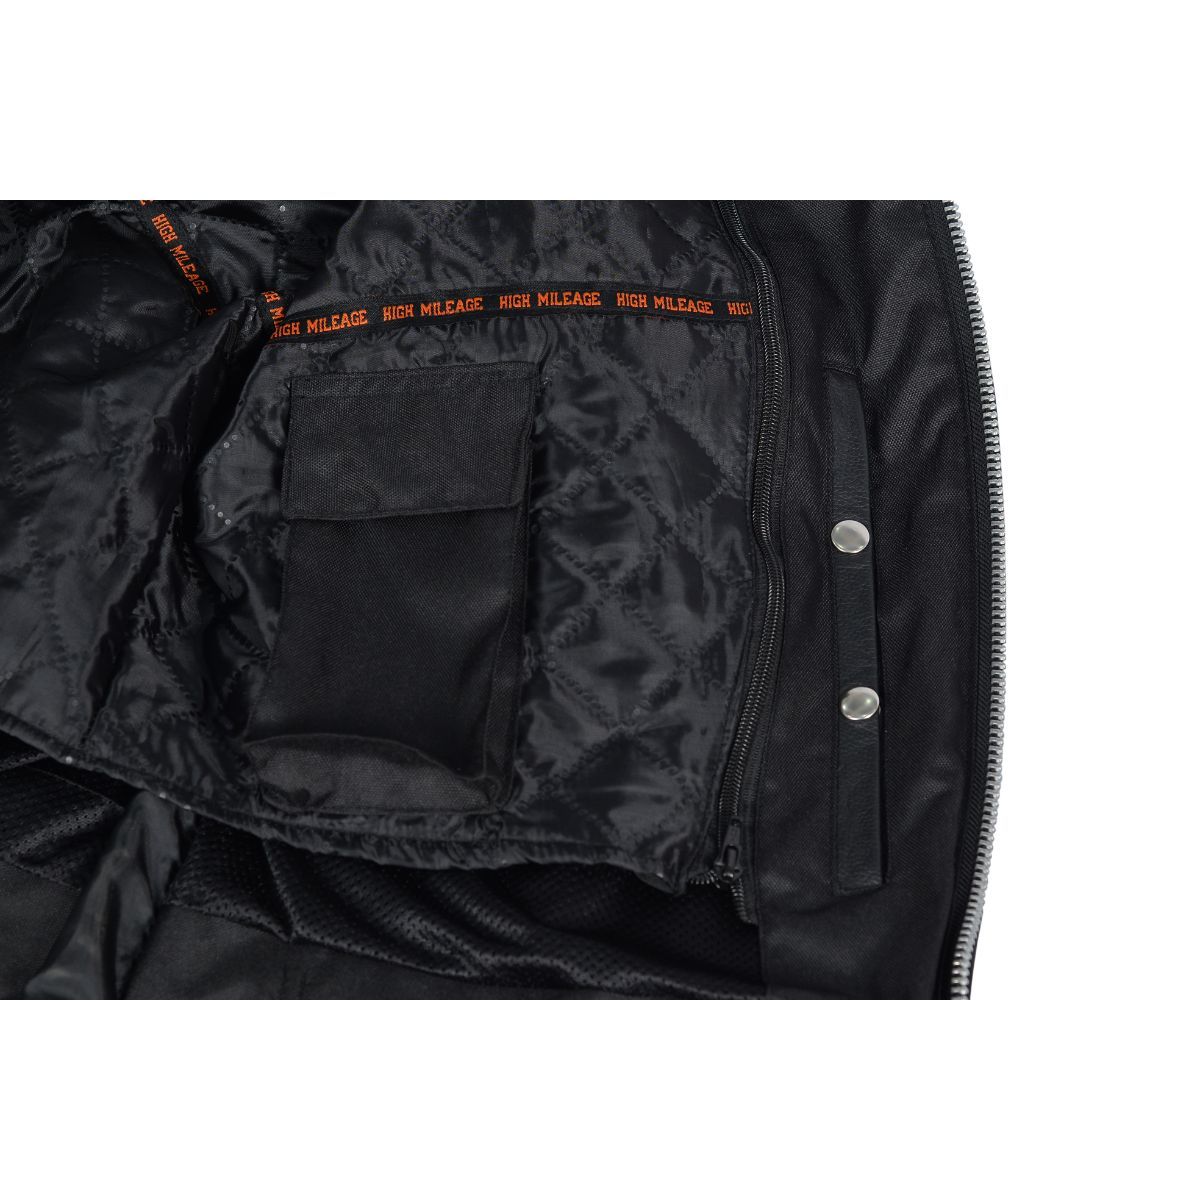 Vance Leather High Mileage Men's Black Vented Premium Leather Scooter Jacket